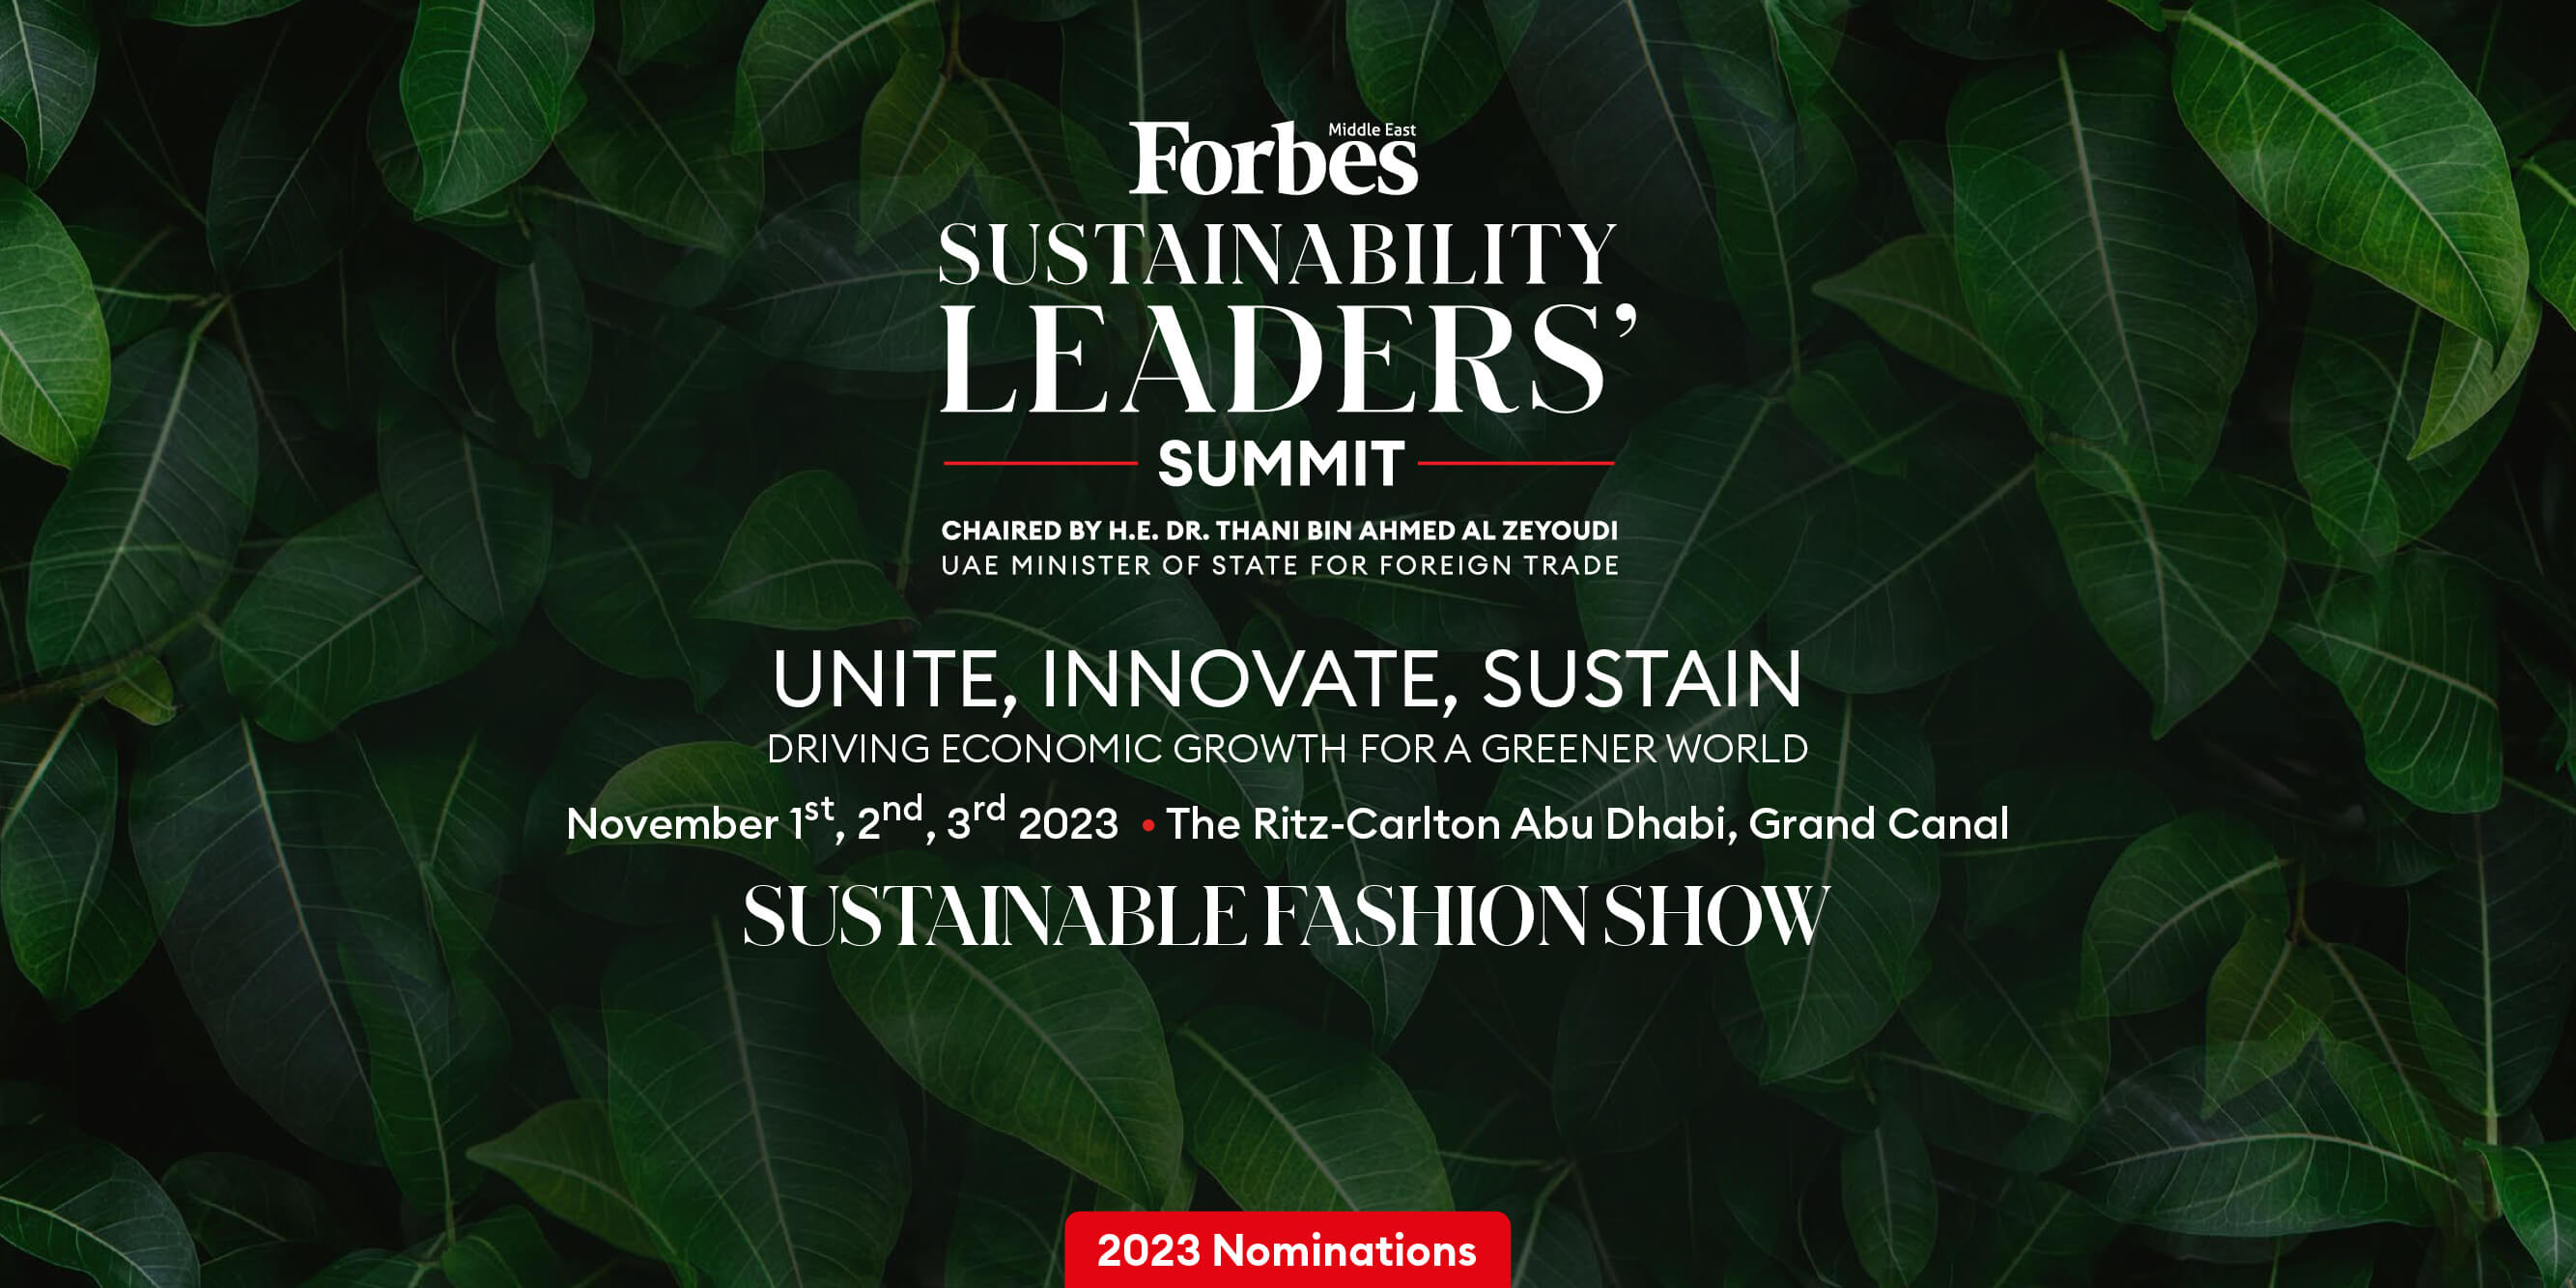 The Sustainable Fashion Show Competition